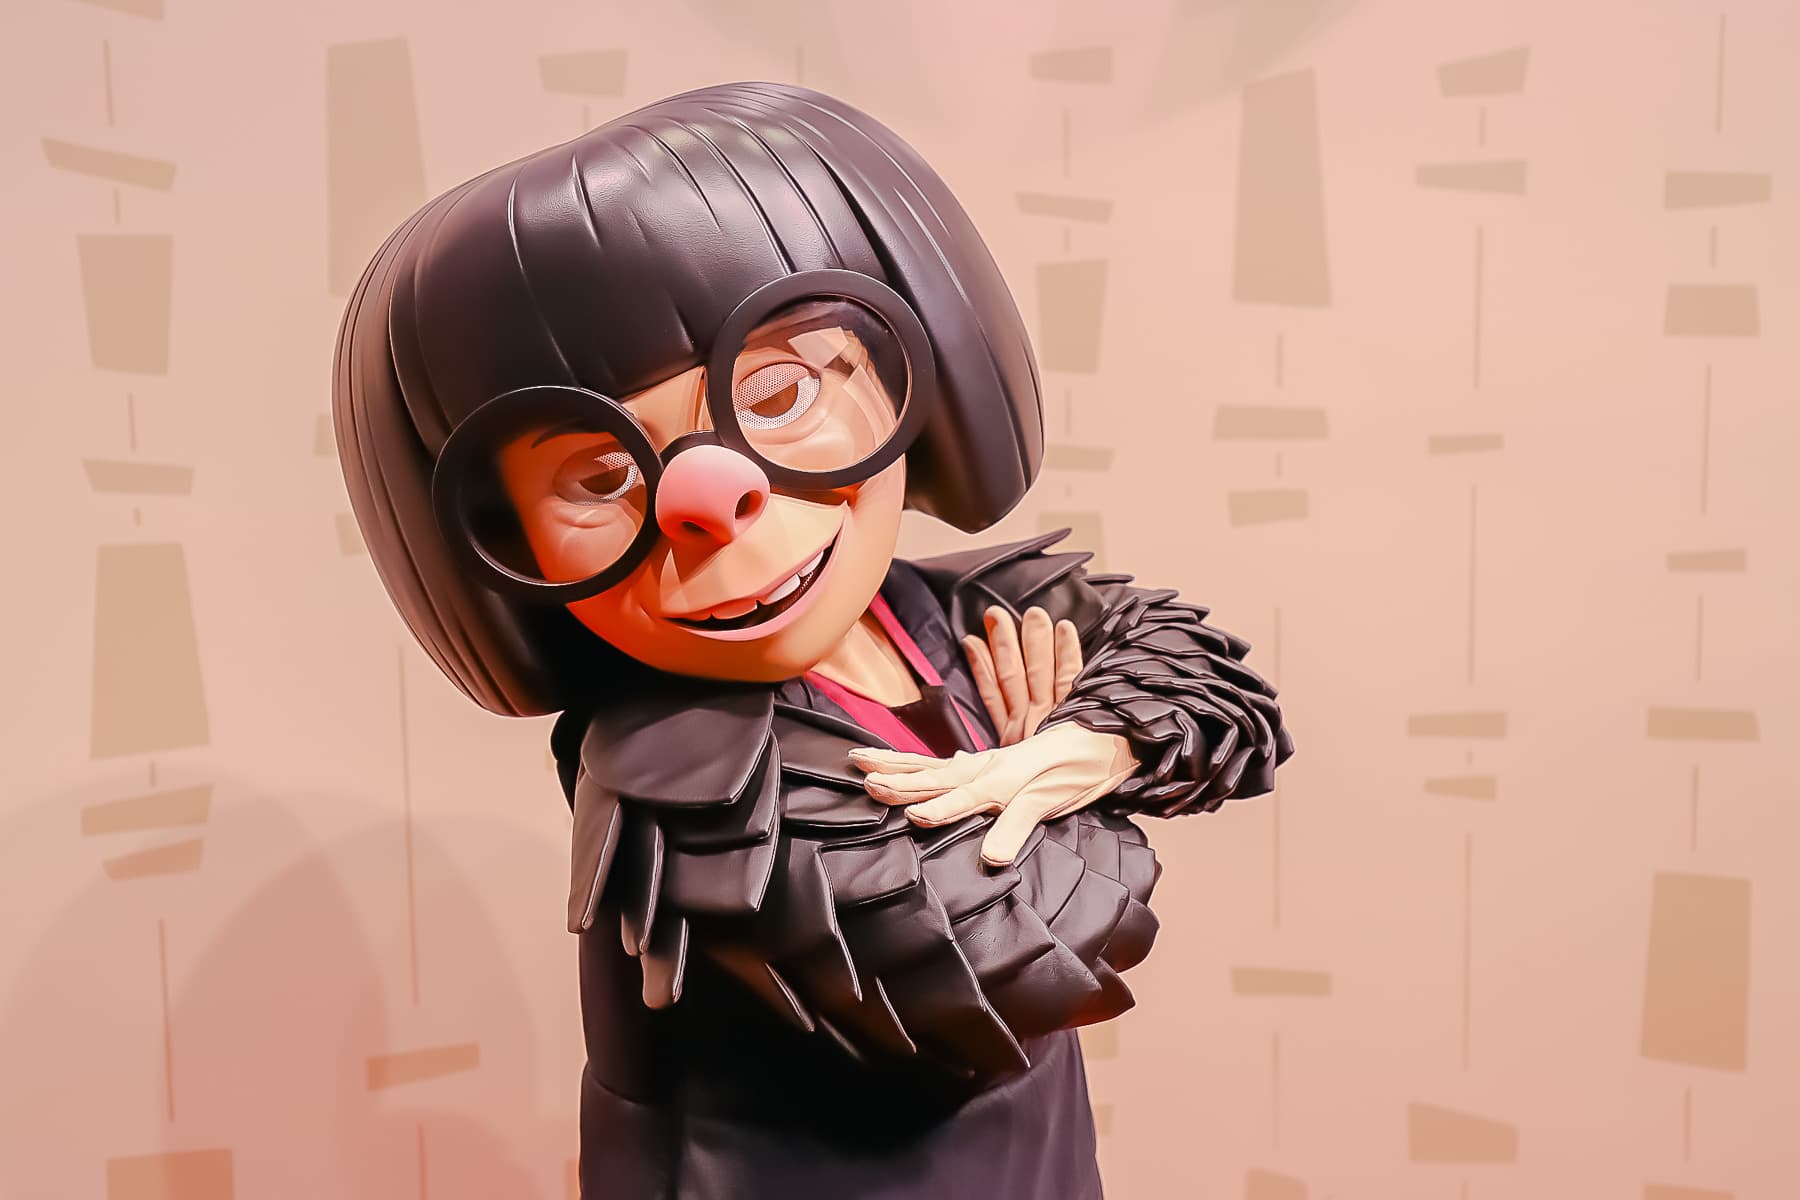 Edna Mode poses with arms crossed.